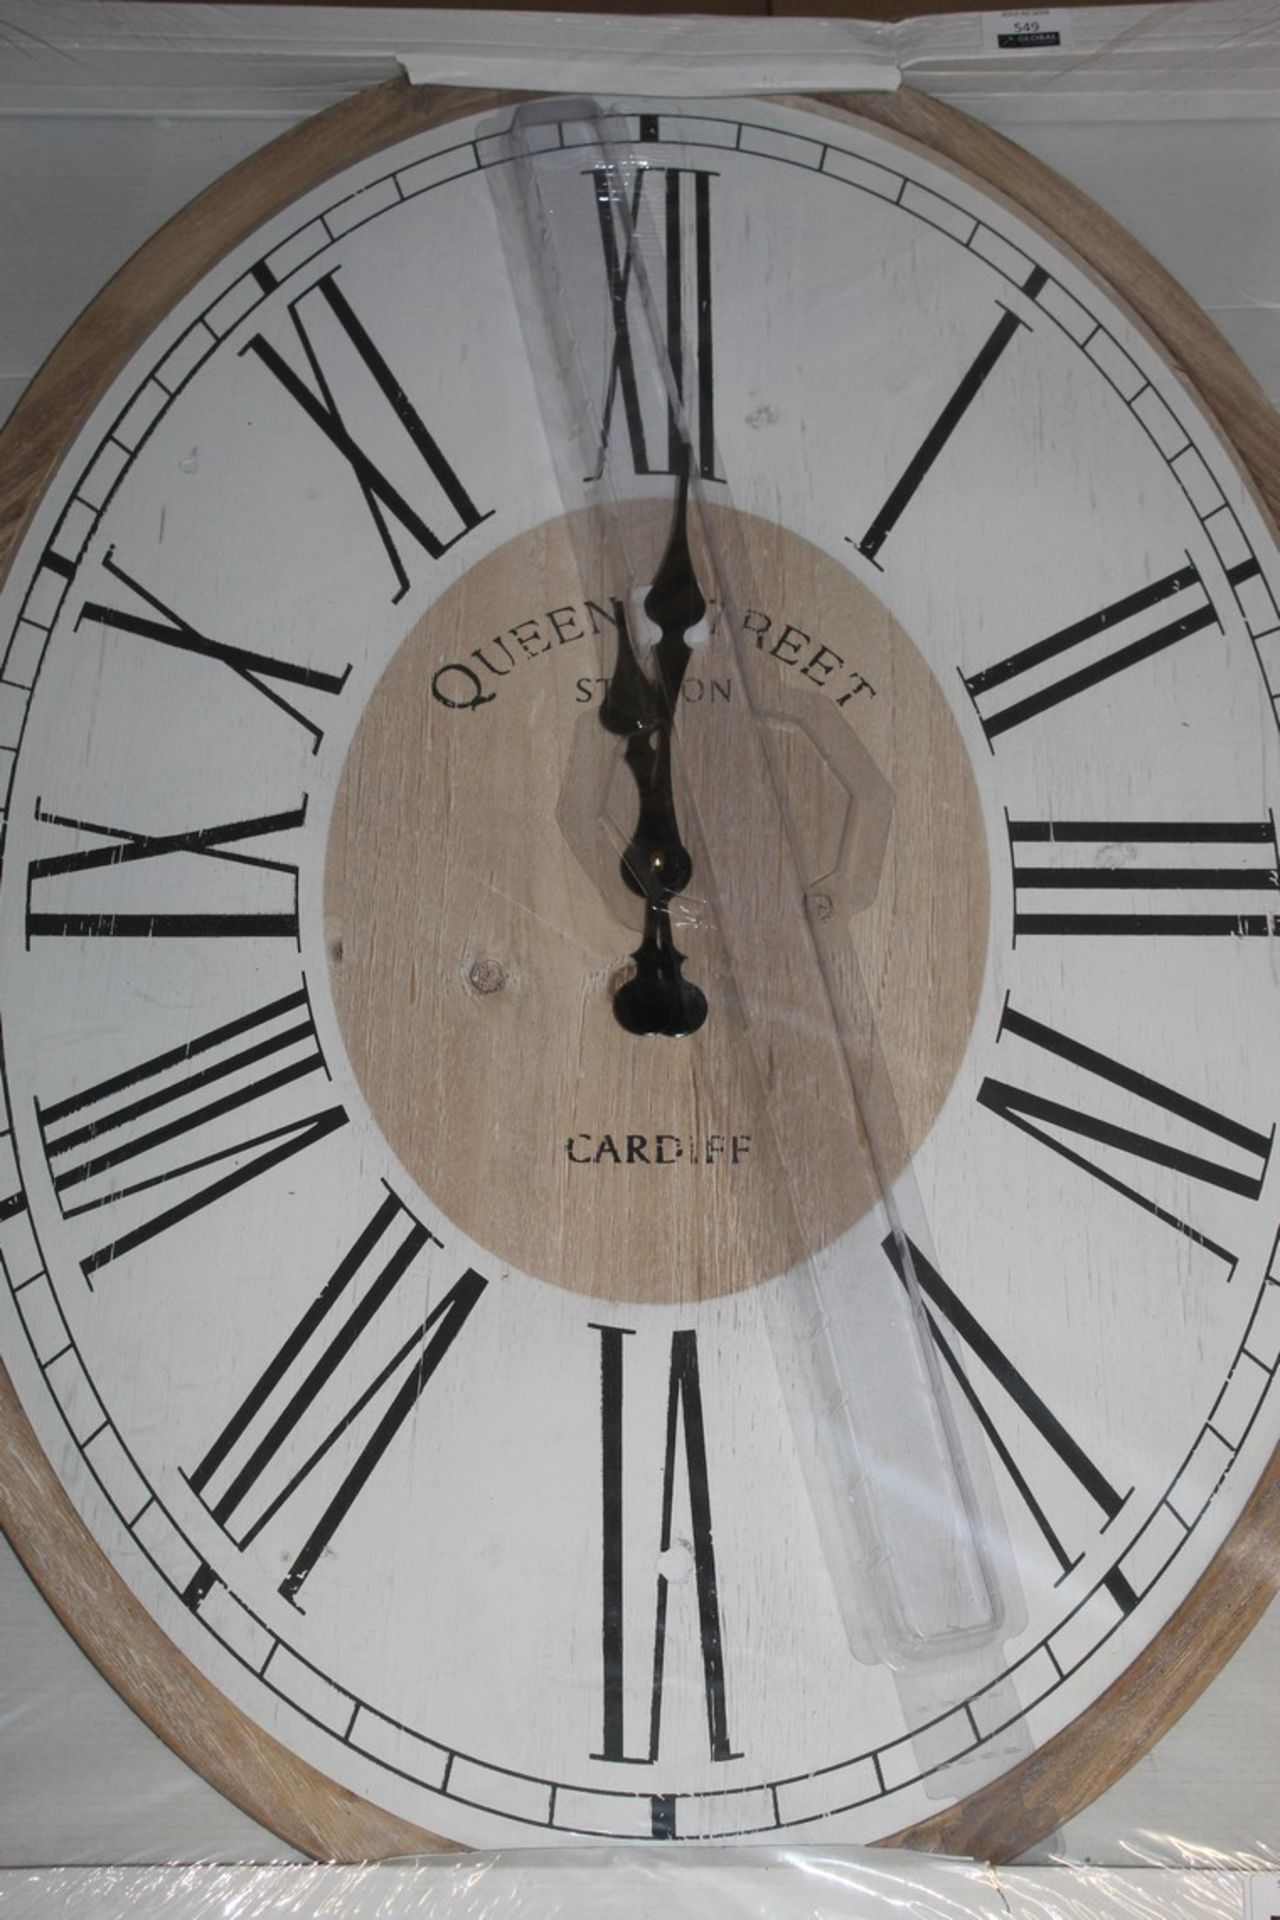 The Queen Street Station Cardiff Wall Clock RRP £9